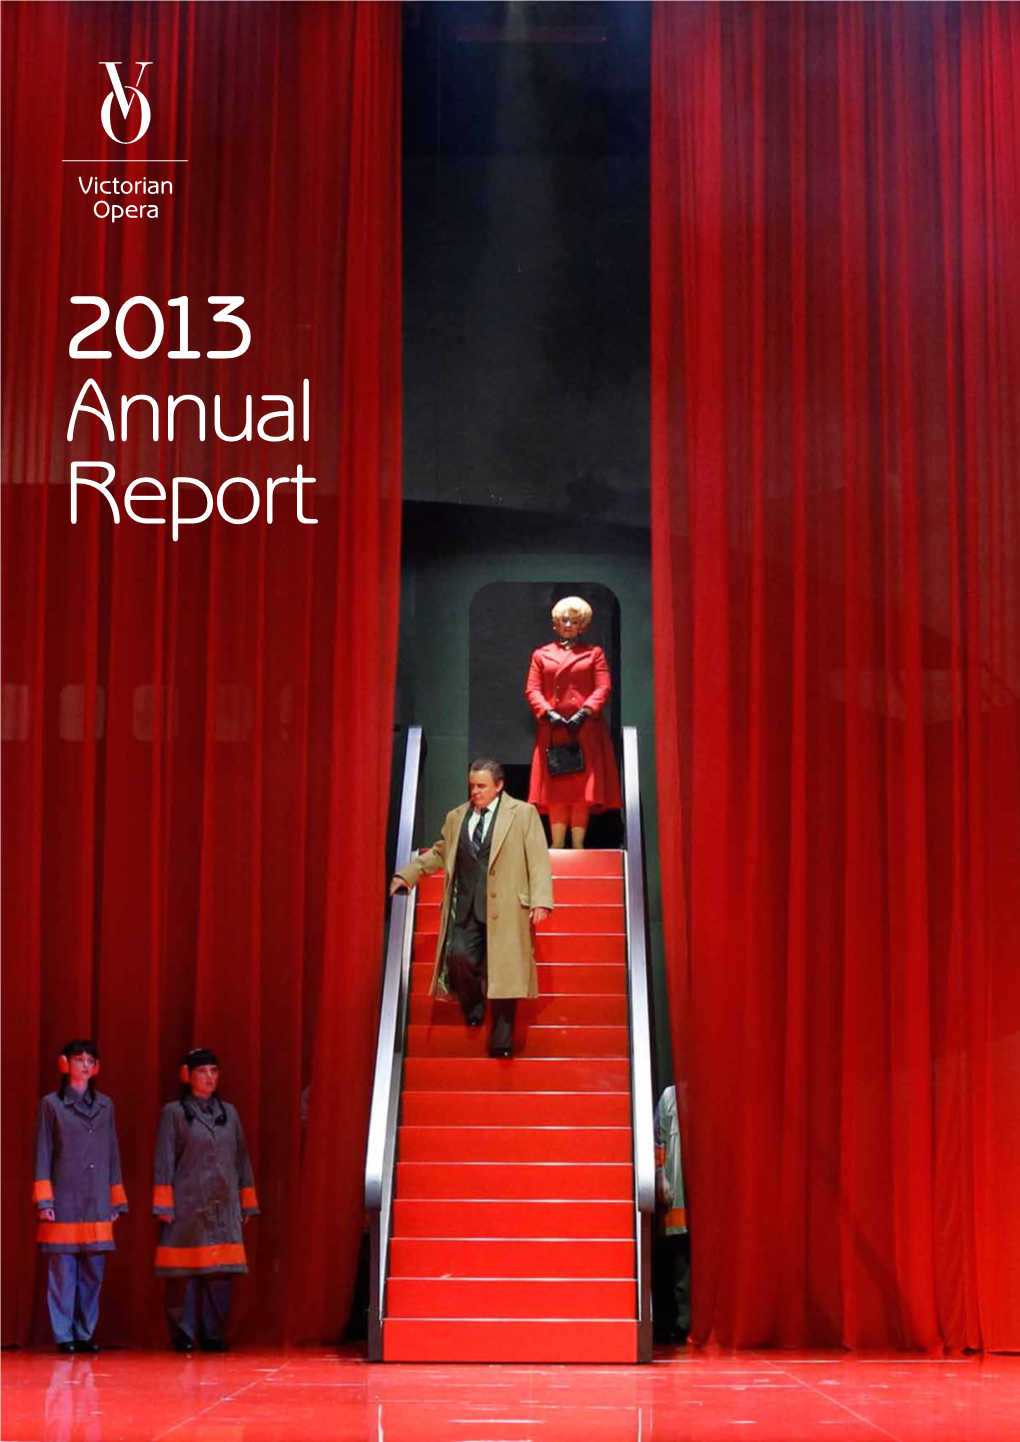 2013 Annual Report Richard Mills Commenced As Artistic Director with His First Season for the Company